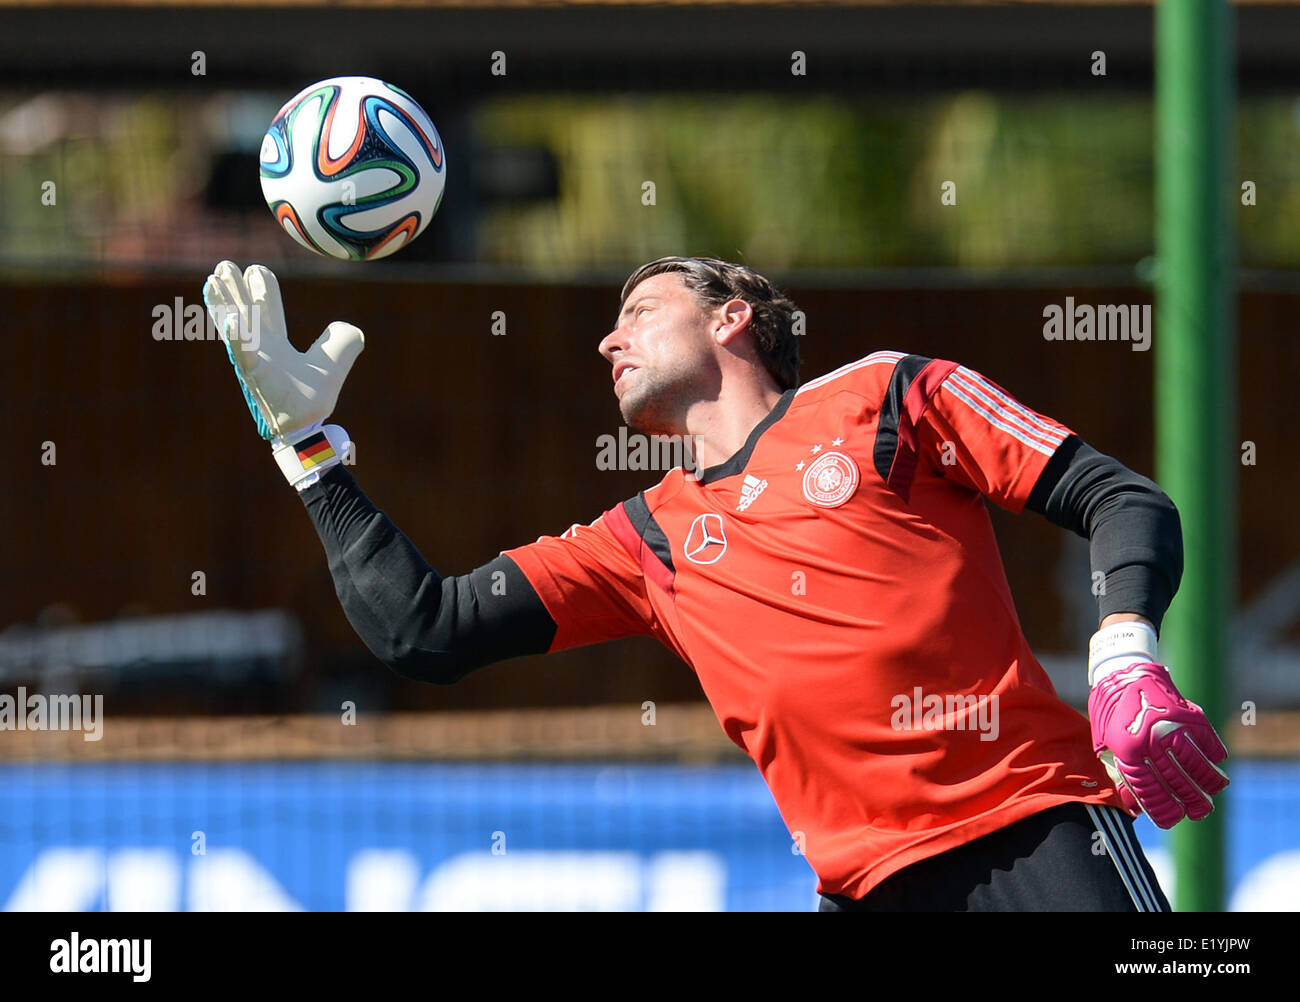 Goalkeeper Roman Weidenfeller of the German national soccer team in action during a training session in Santo Andre in Brazil, 11 June 2014. The FIFA World Cup 2014 will take place in Brazil from 12 June to 13 July 2014. Photo: Andreas Gebert/dpa Stock Photo